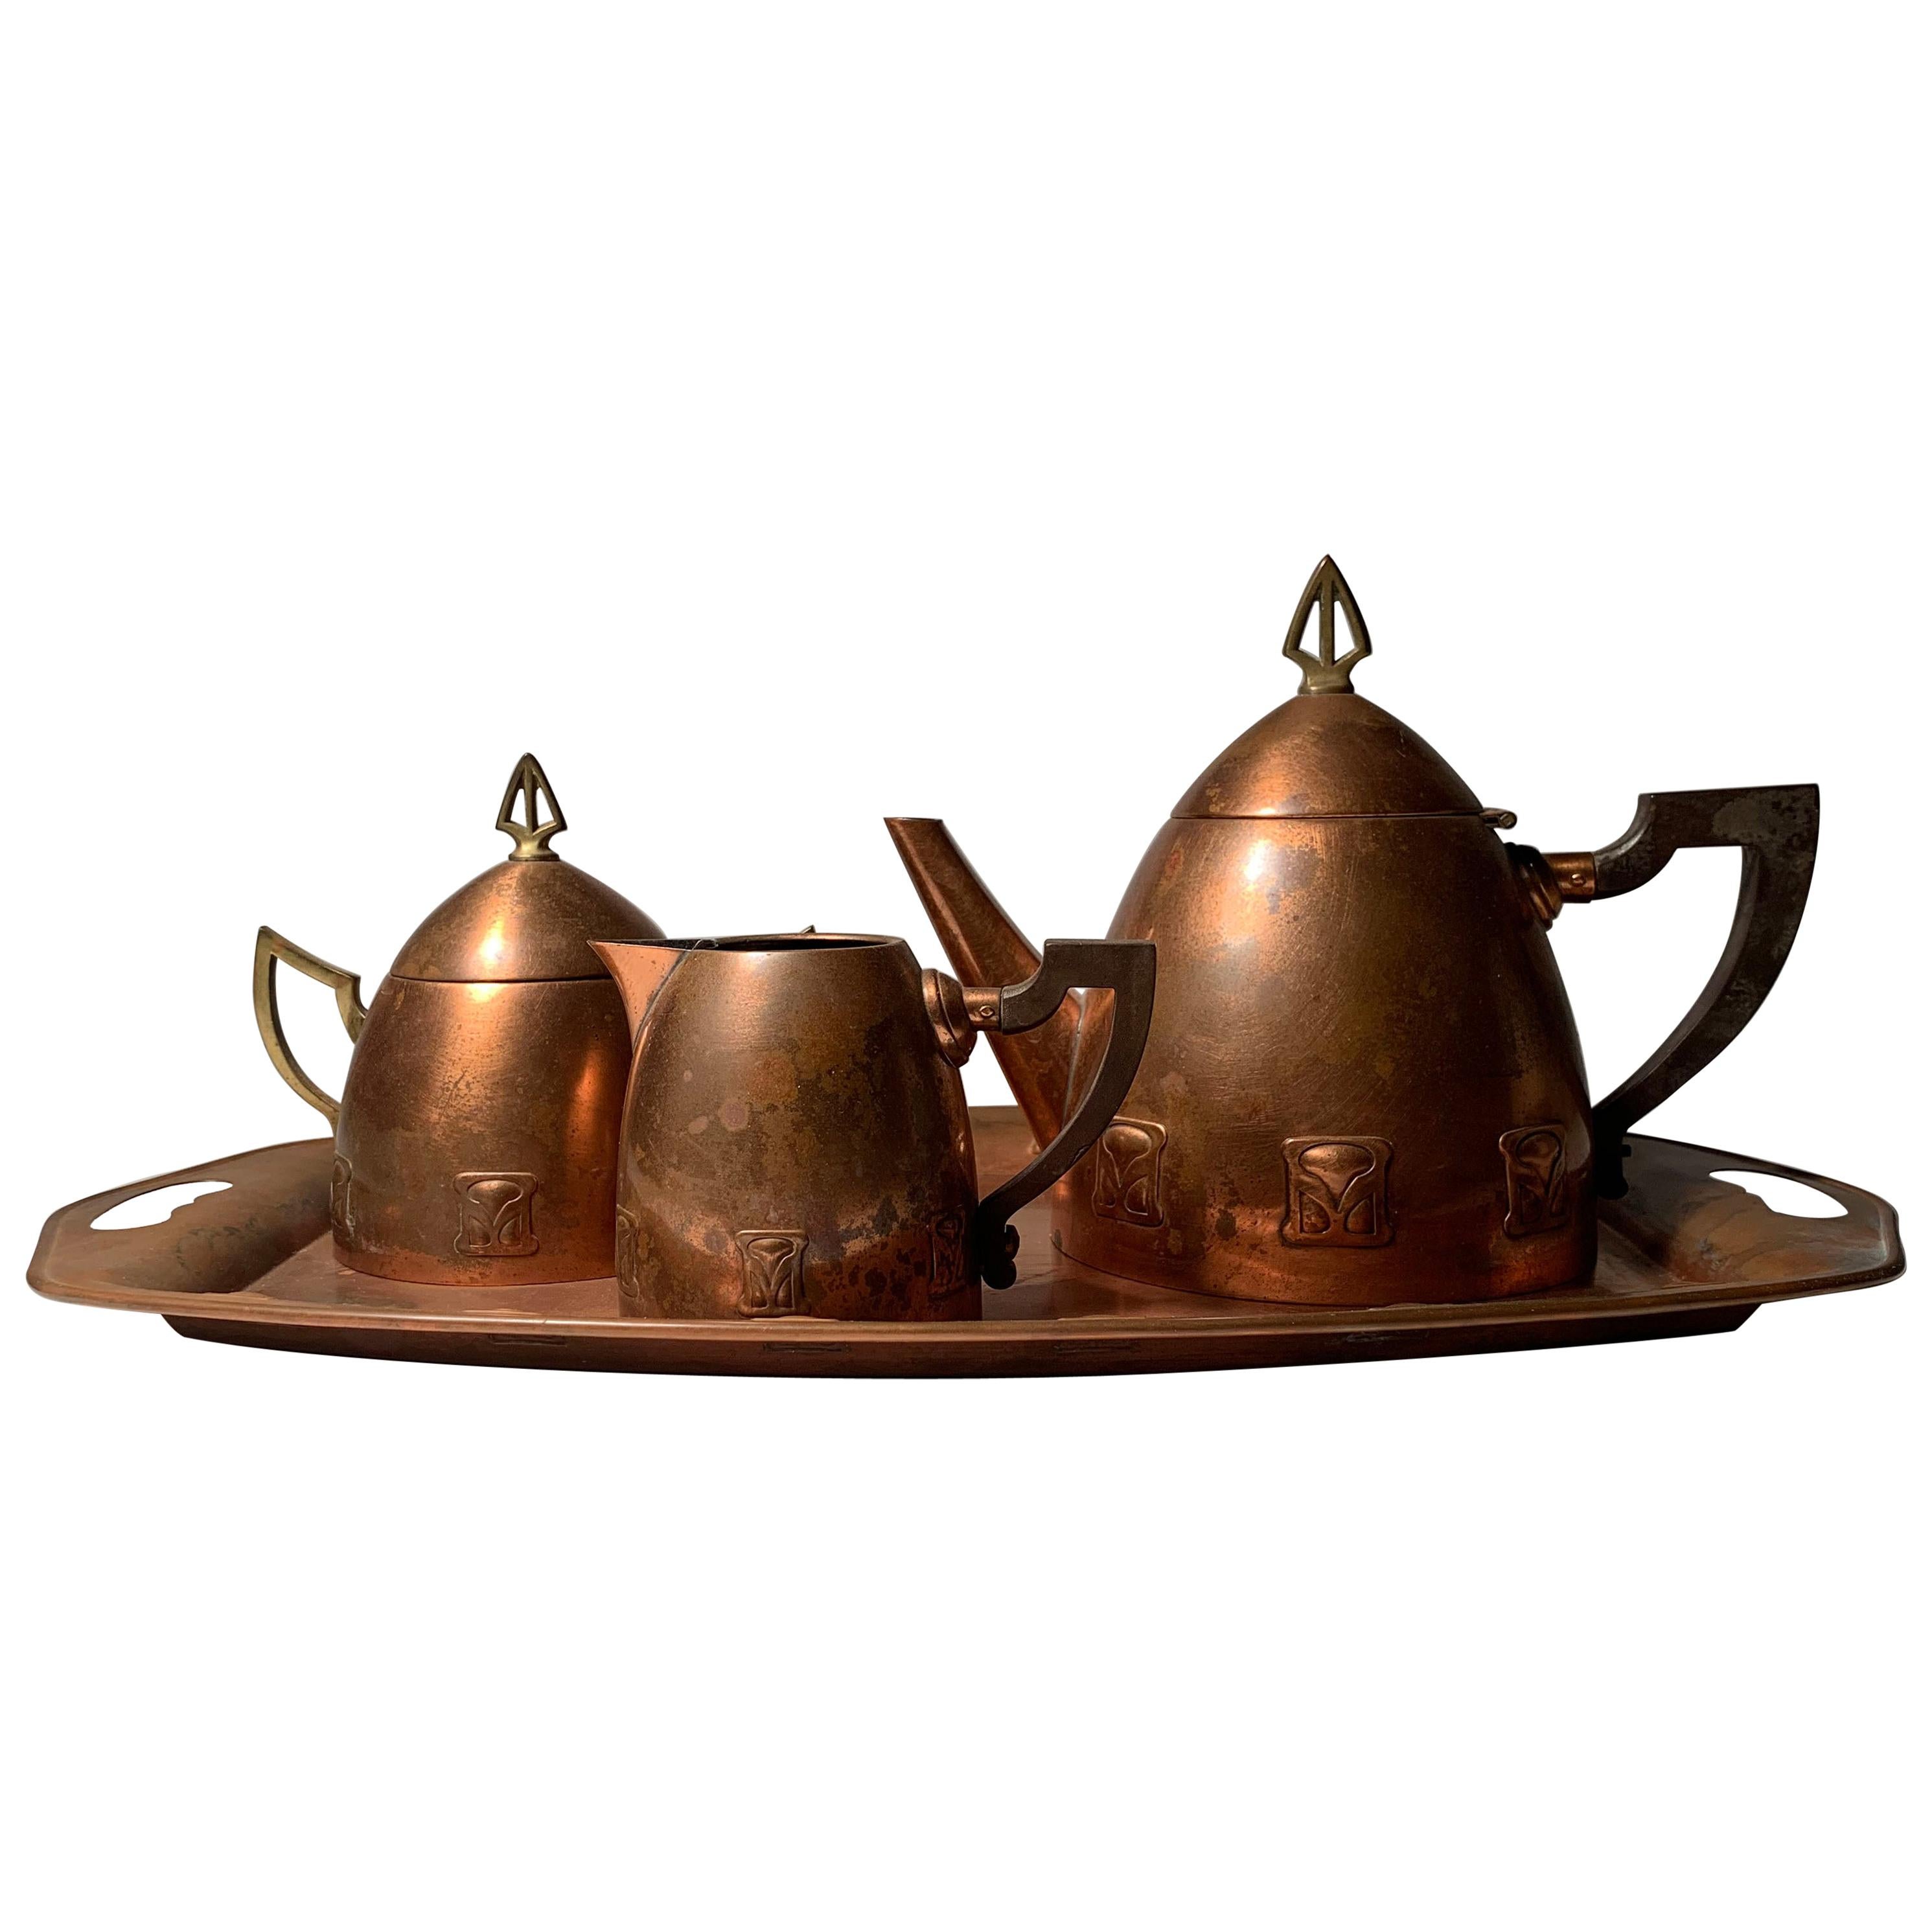 Jugendstil Copper and Brass Teapot by Atelier Mayer for WMF, Germany, 1905-1910 For Sale